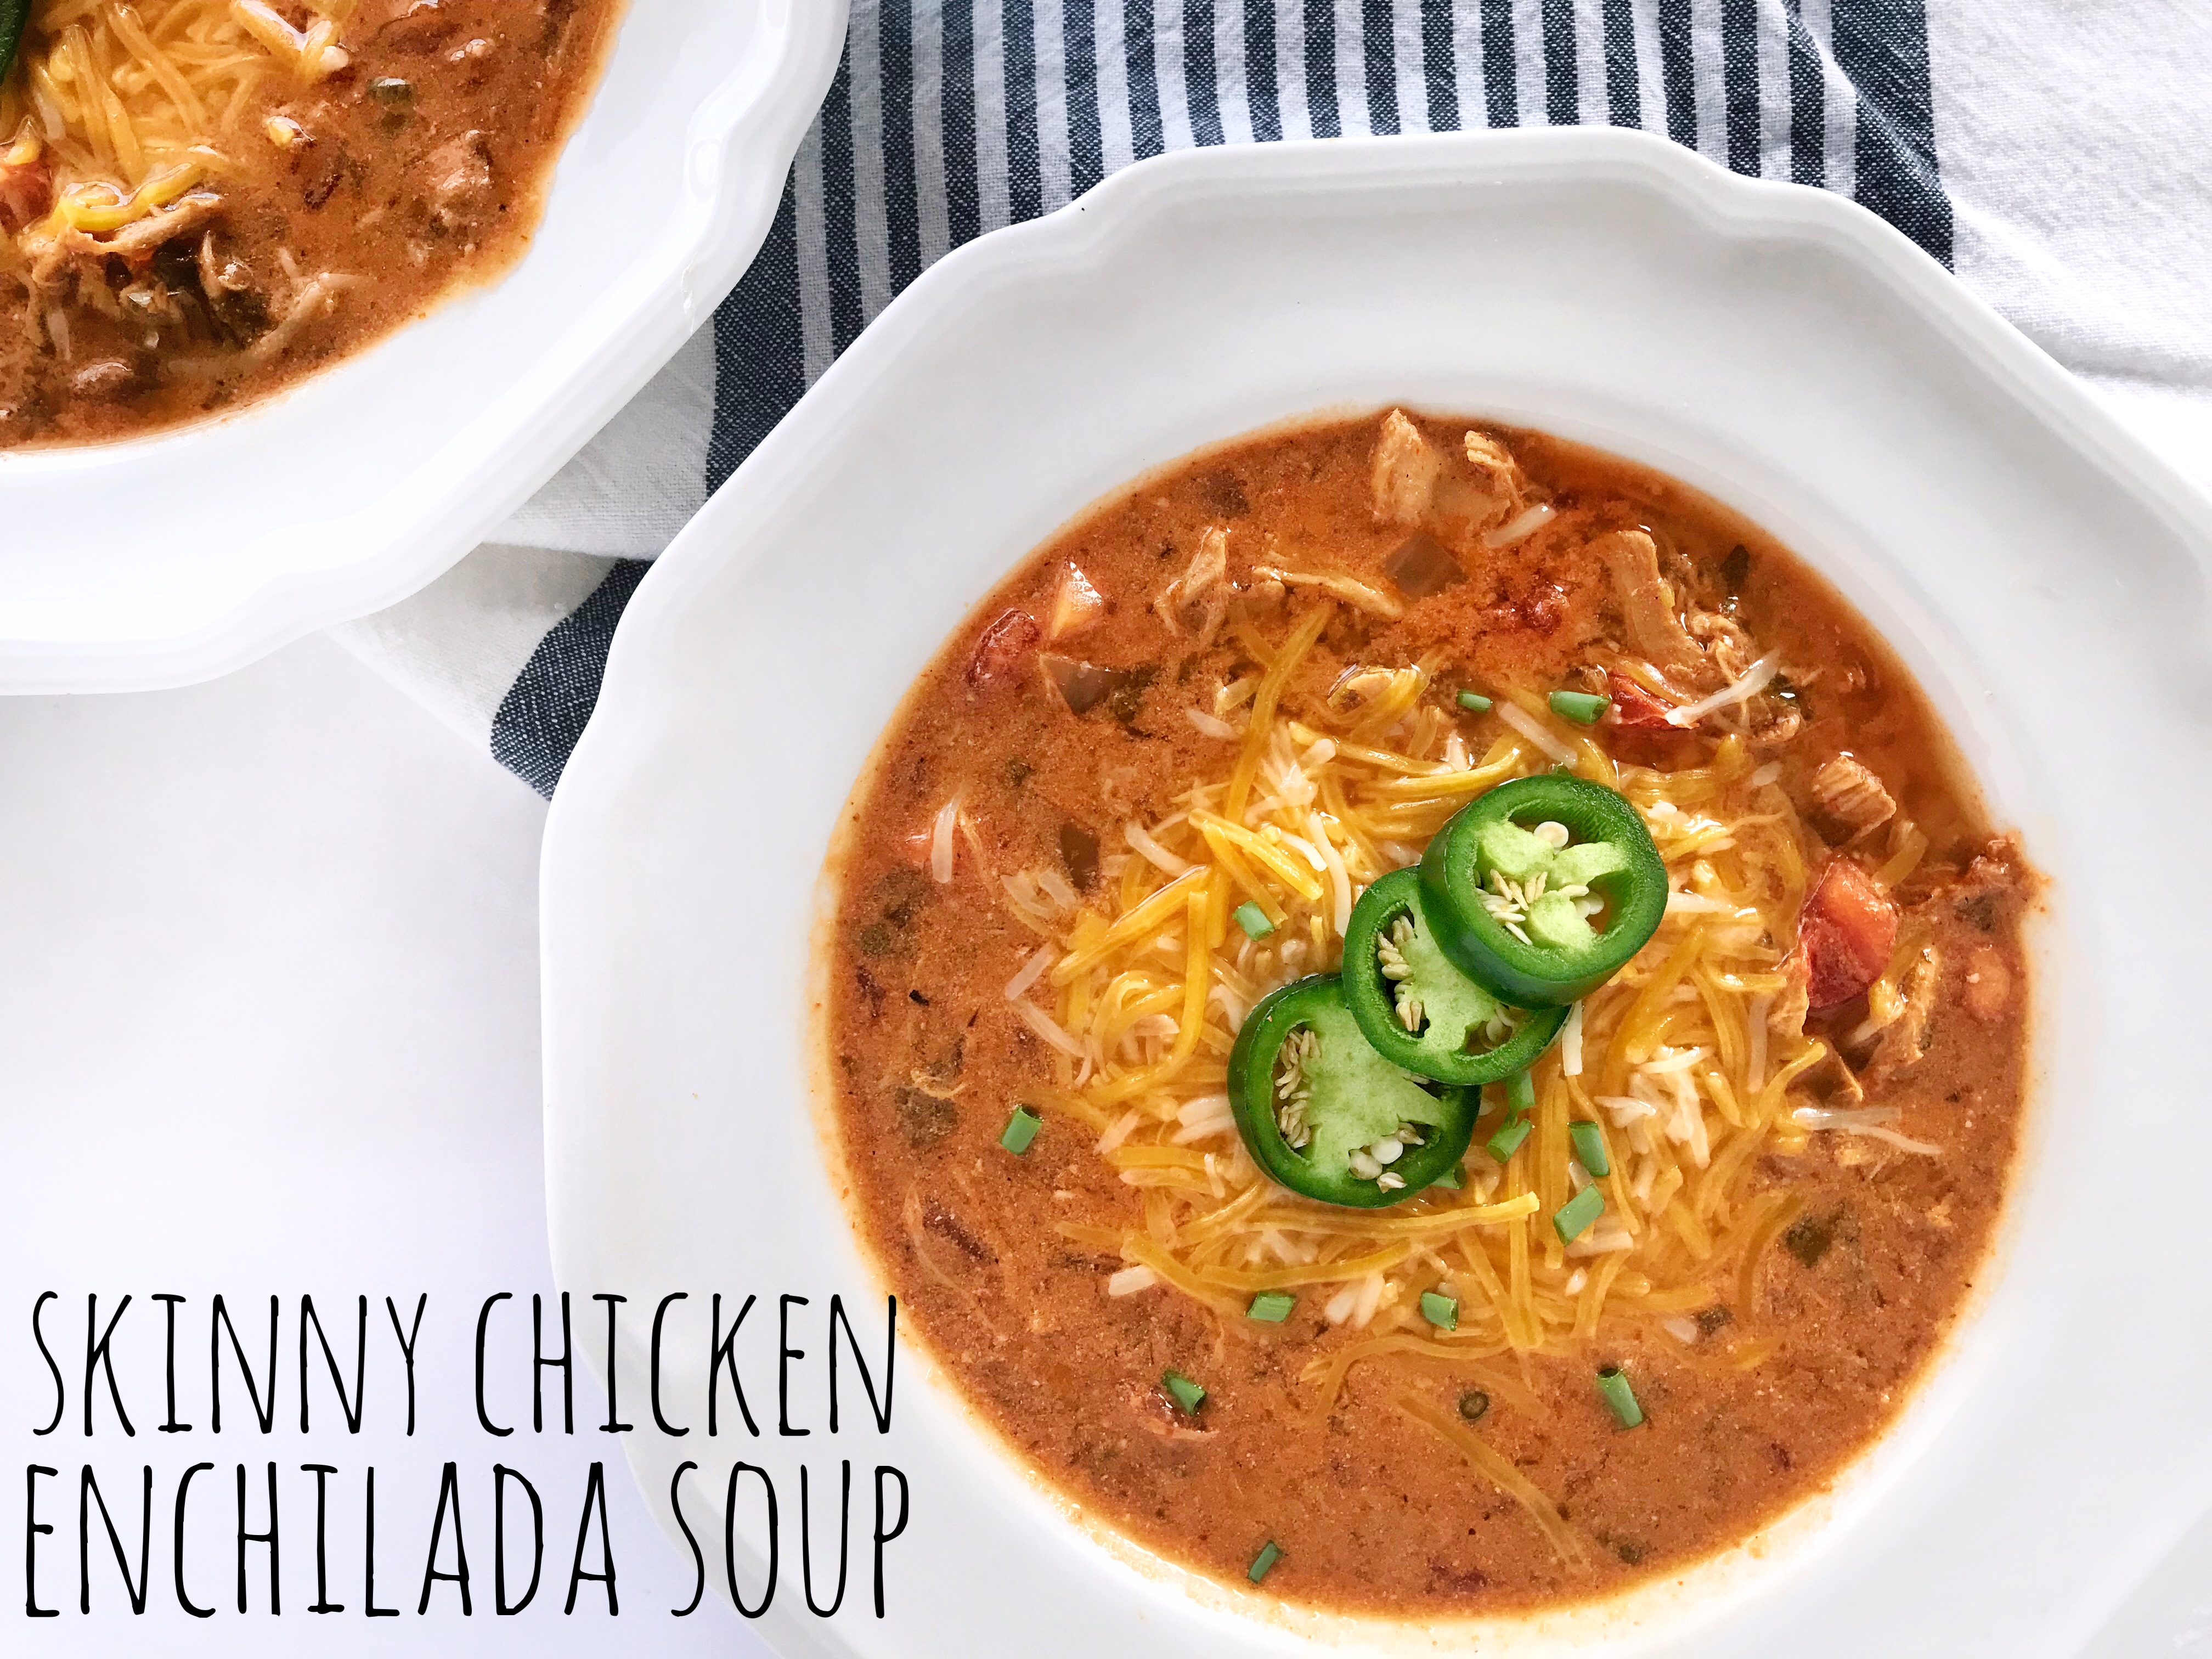 Try our skinny chicken enchilada soup recipe